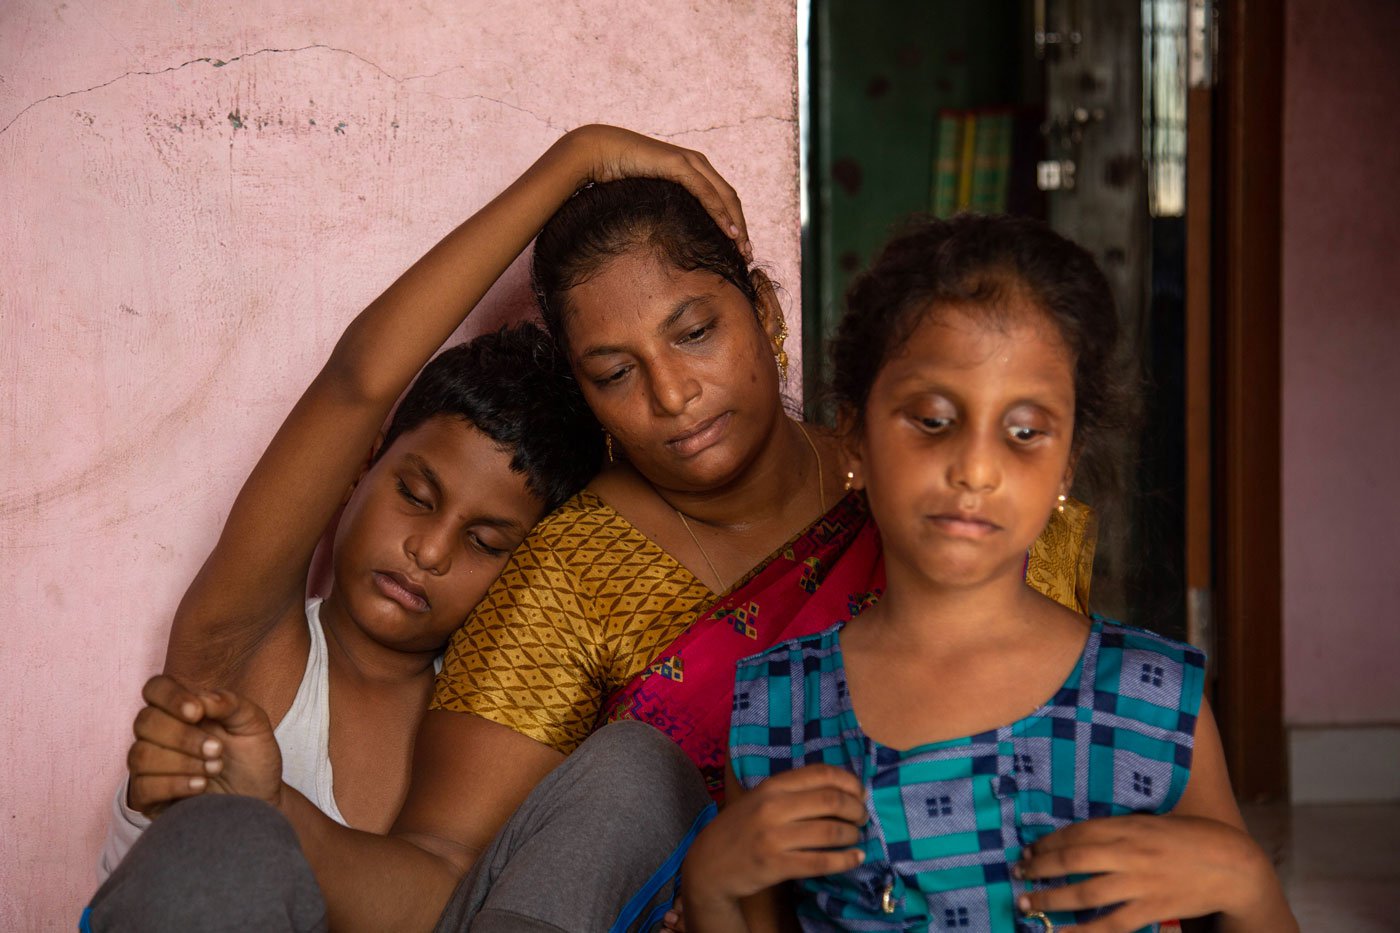 Despite the daily challenges of caring for her three children, Saranya finds peace in spending time with them at home